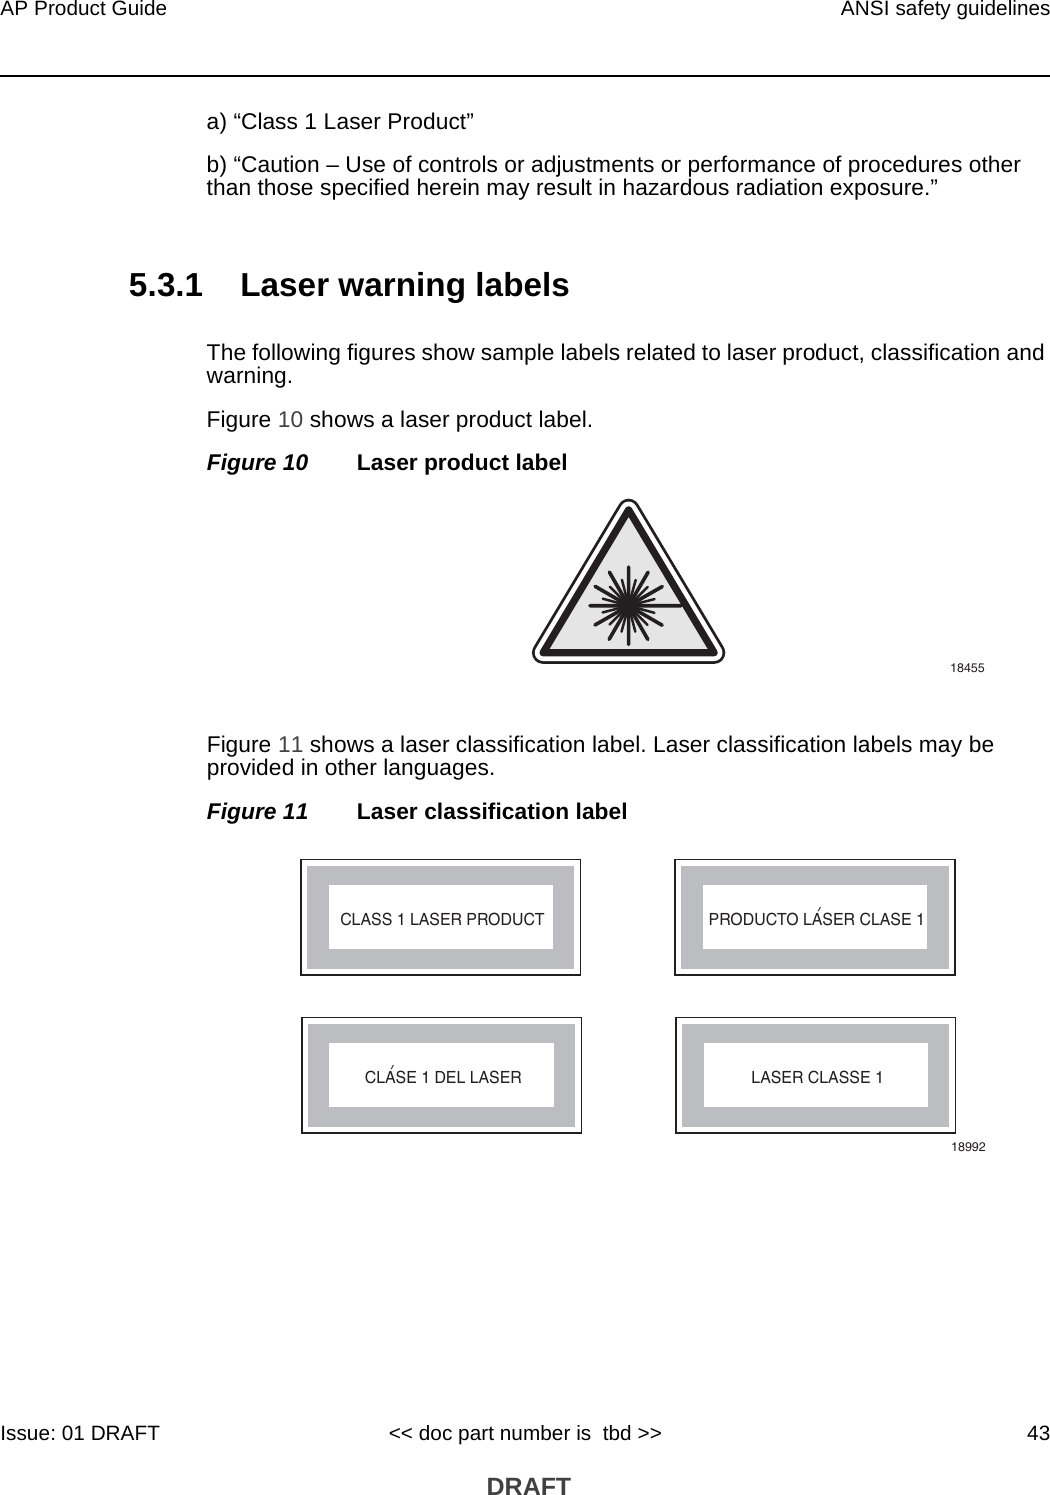 AP Product Guide ANSI safety guidelinesIssue: 01 DRAFT &lt;&lt; doc part number is  tbd &gt;&gt; 43 DRAFTa) “Class 1 Laser Product”b) “Caution – Use of controls or adjustments or performance of procedures other than those specified herein may result in hazardous radiation exposure.”5.3.1 Laser warning labelsThe following figures show sample labels related to laser product, classification and warning. Figure 10 shows a laser product label.Figure 10 Laser product labelFigure 11 shows a laser classification label. Laser classification labels may be provided in other languages.Figure 11 Laser classification label18455LASER CLASSE 1CLASE 1 DEL LASERCLASS 1 LASER PRODUCT PRODUCTO LASER CLASE 118992&apos;&apos;